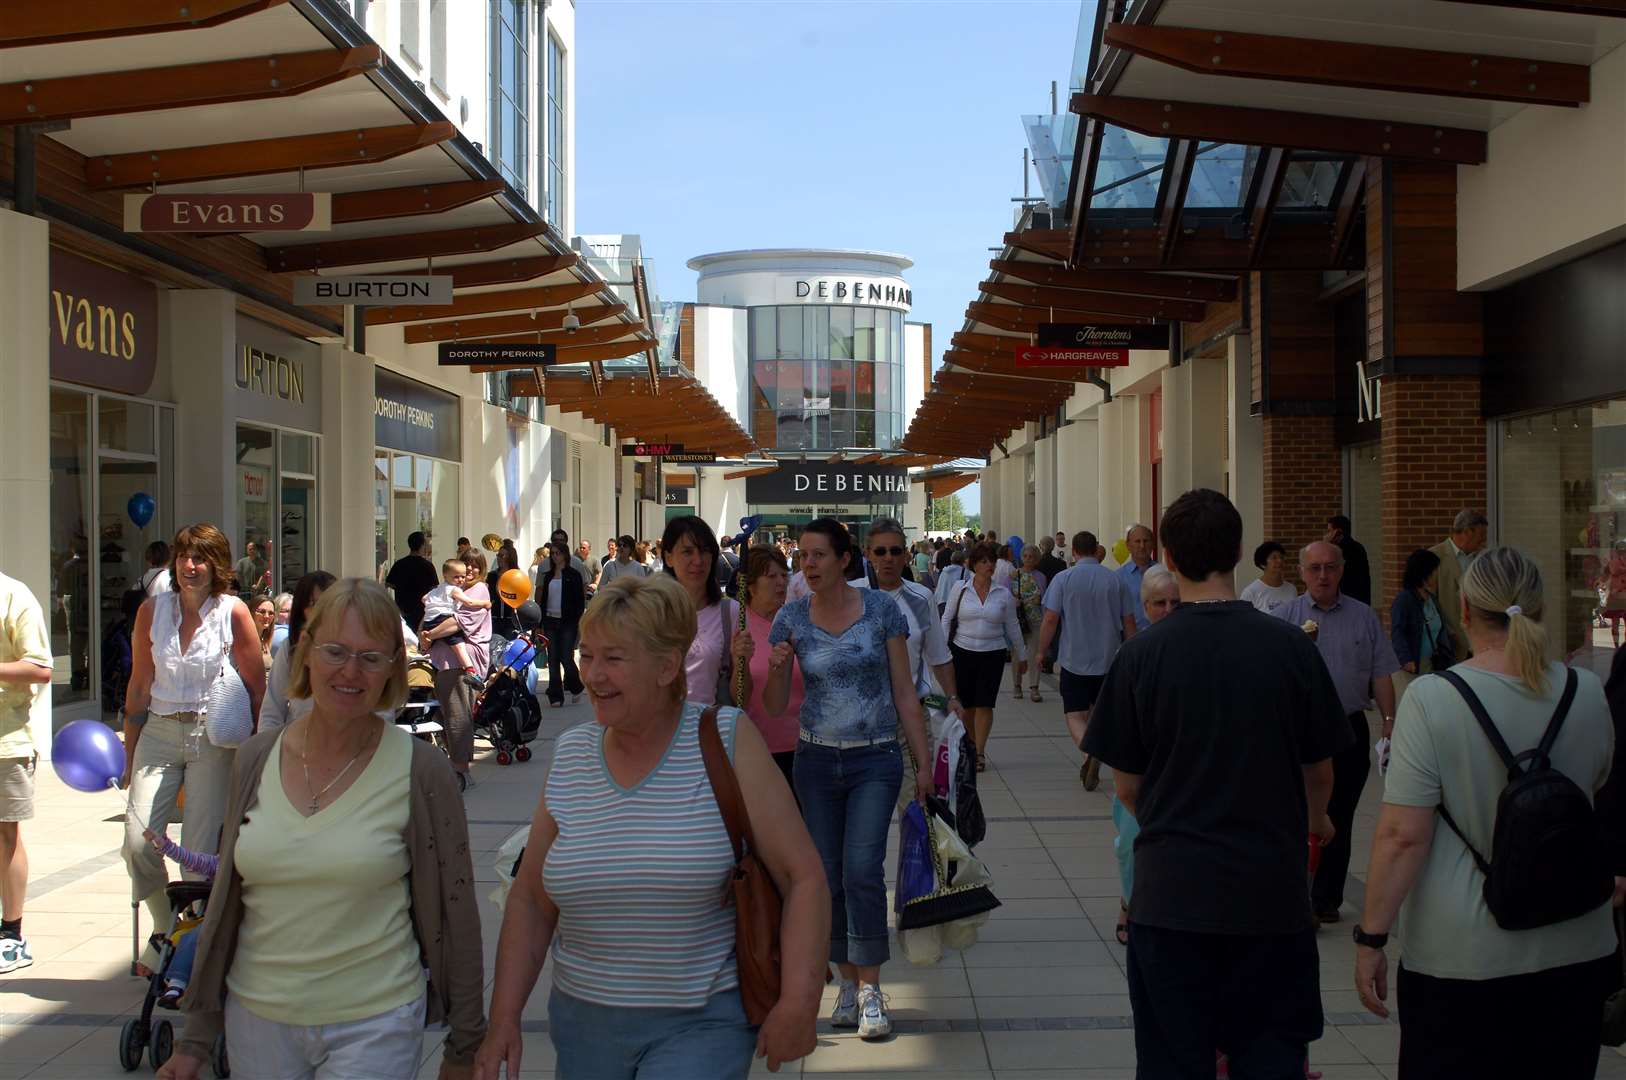 Westwood Cross opened in 2005 - but dealt a heavy blow to nearby high streets